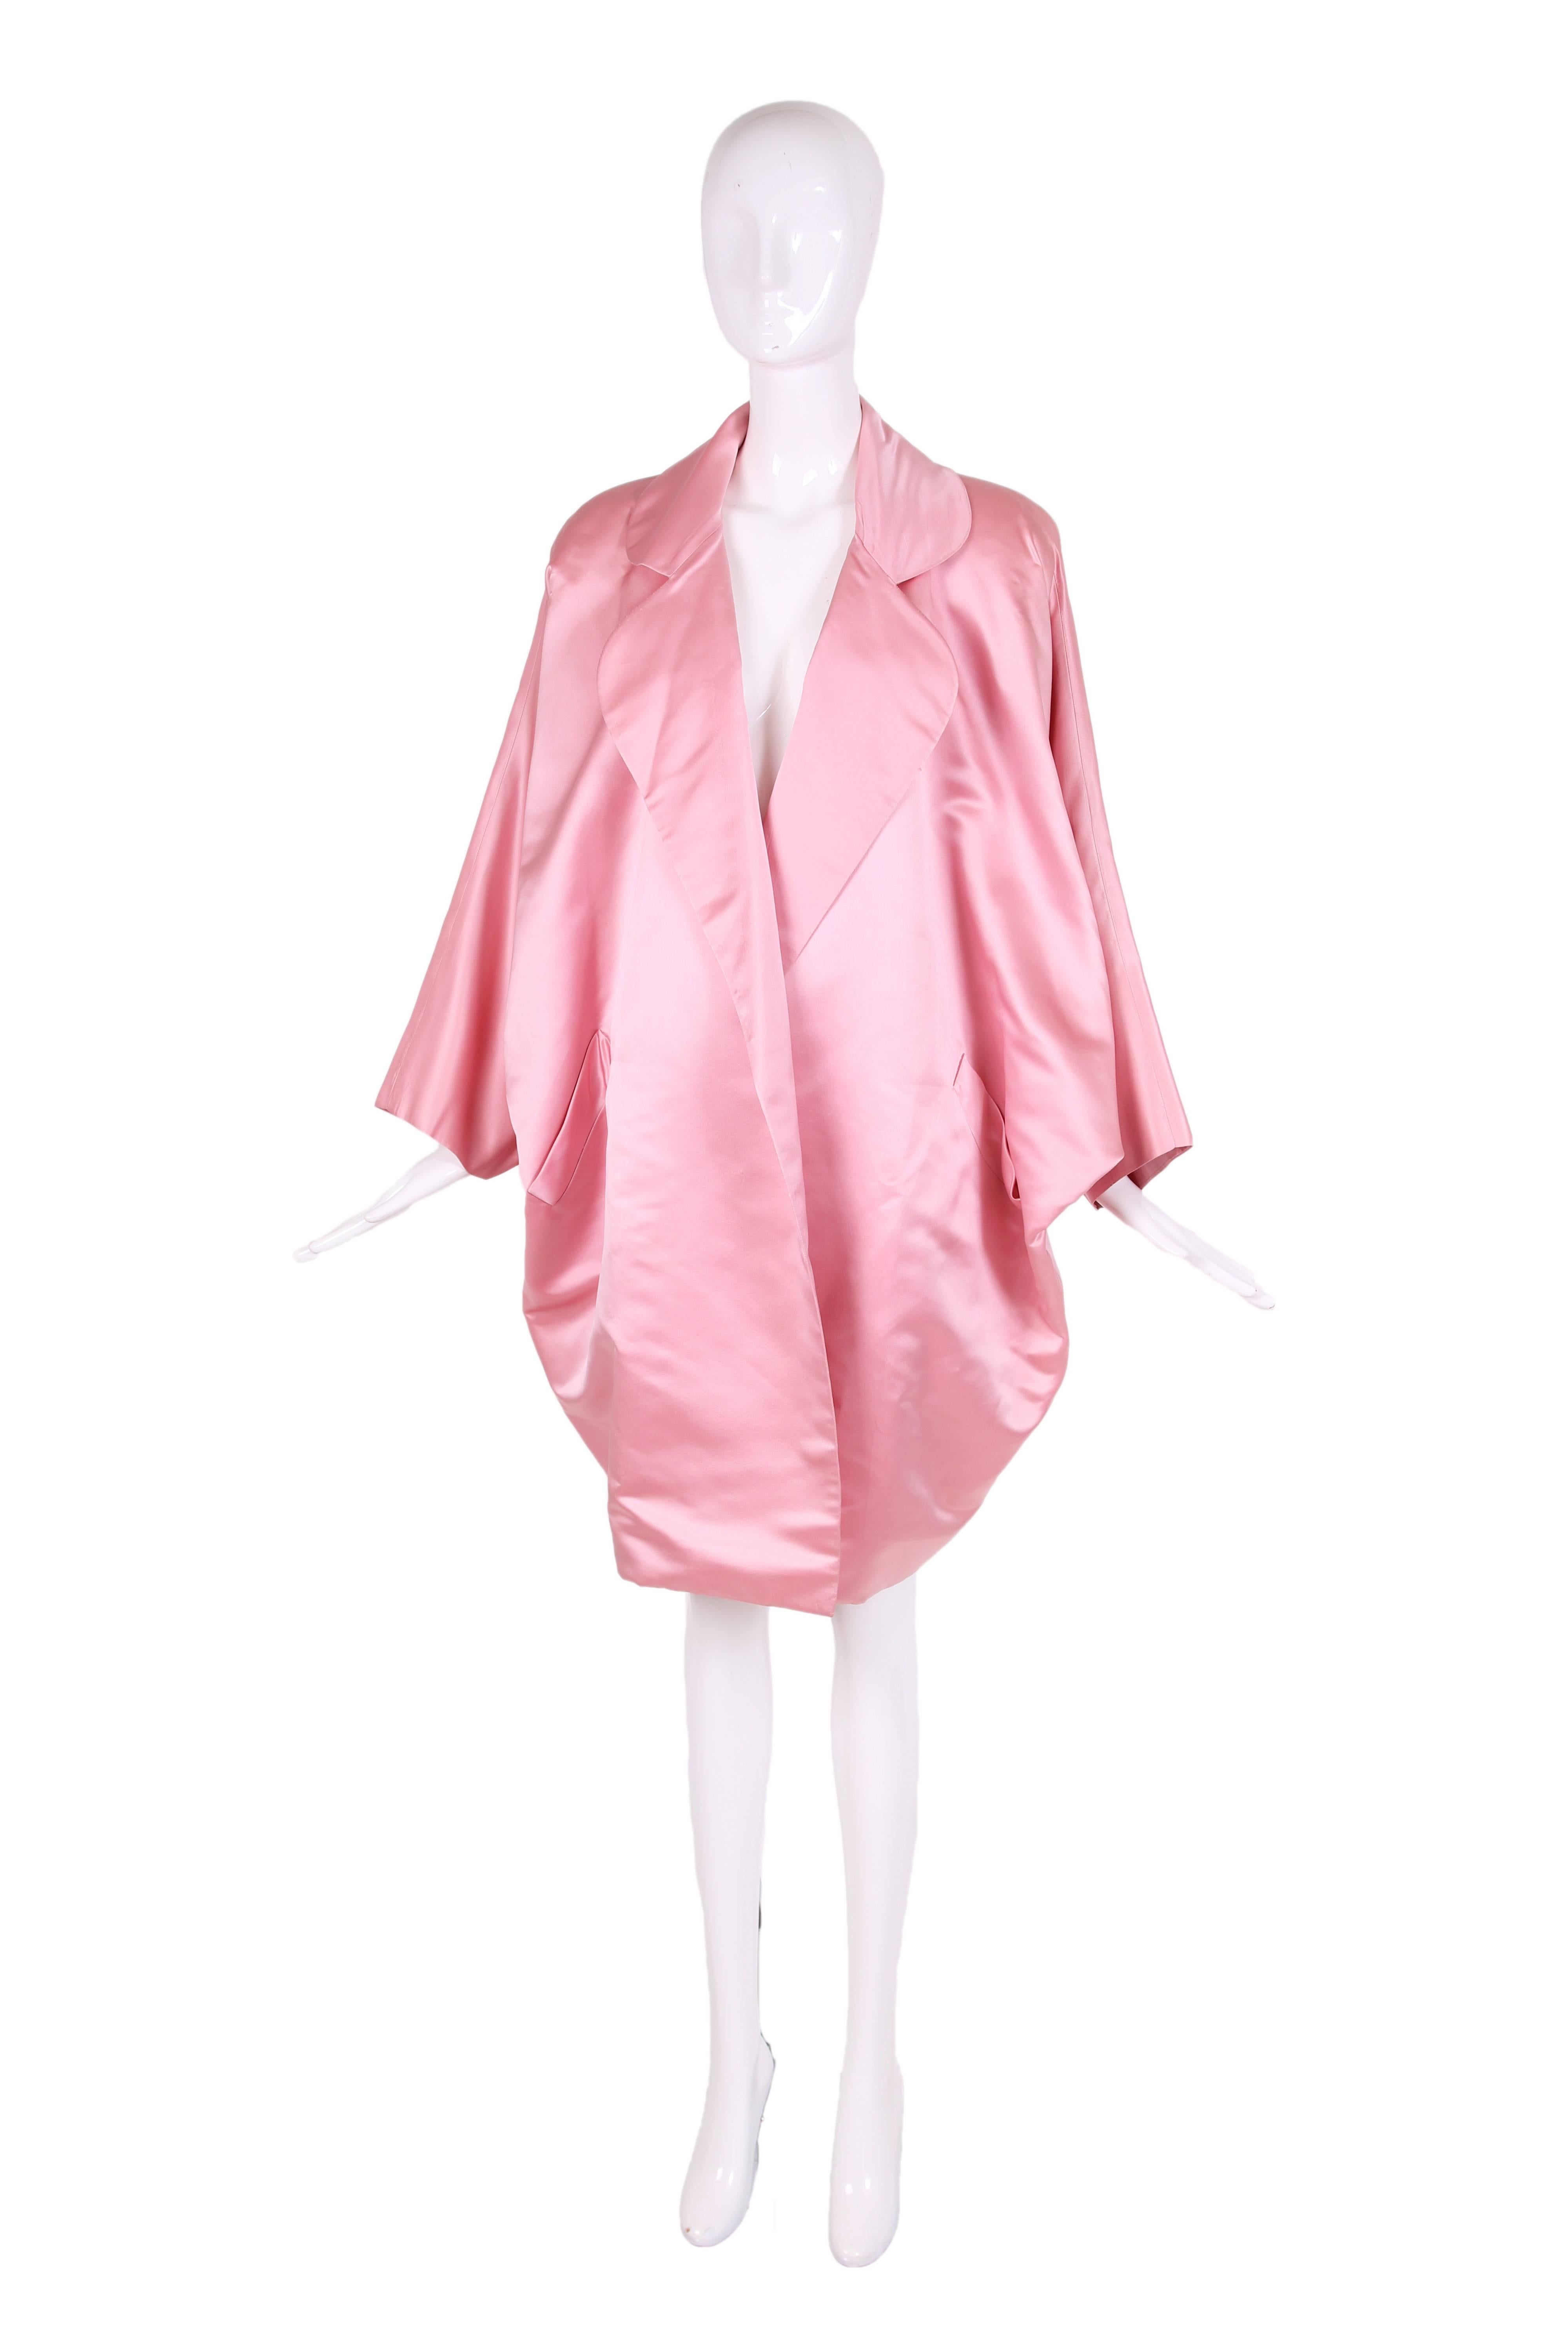 Bill Blass pink silk satin oversized cocoon coat with dolman sleeves, clover lapels and pockets. In excellent condition - no size tag. Will fit a variety of sizes.